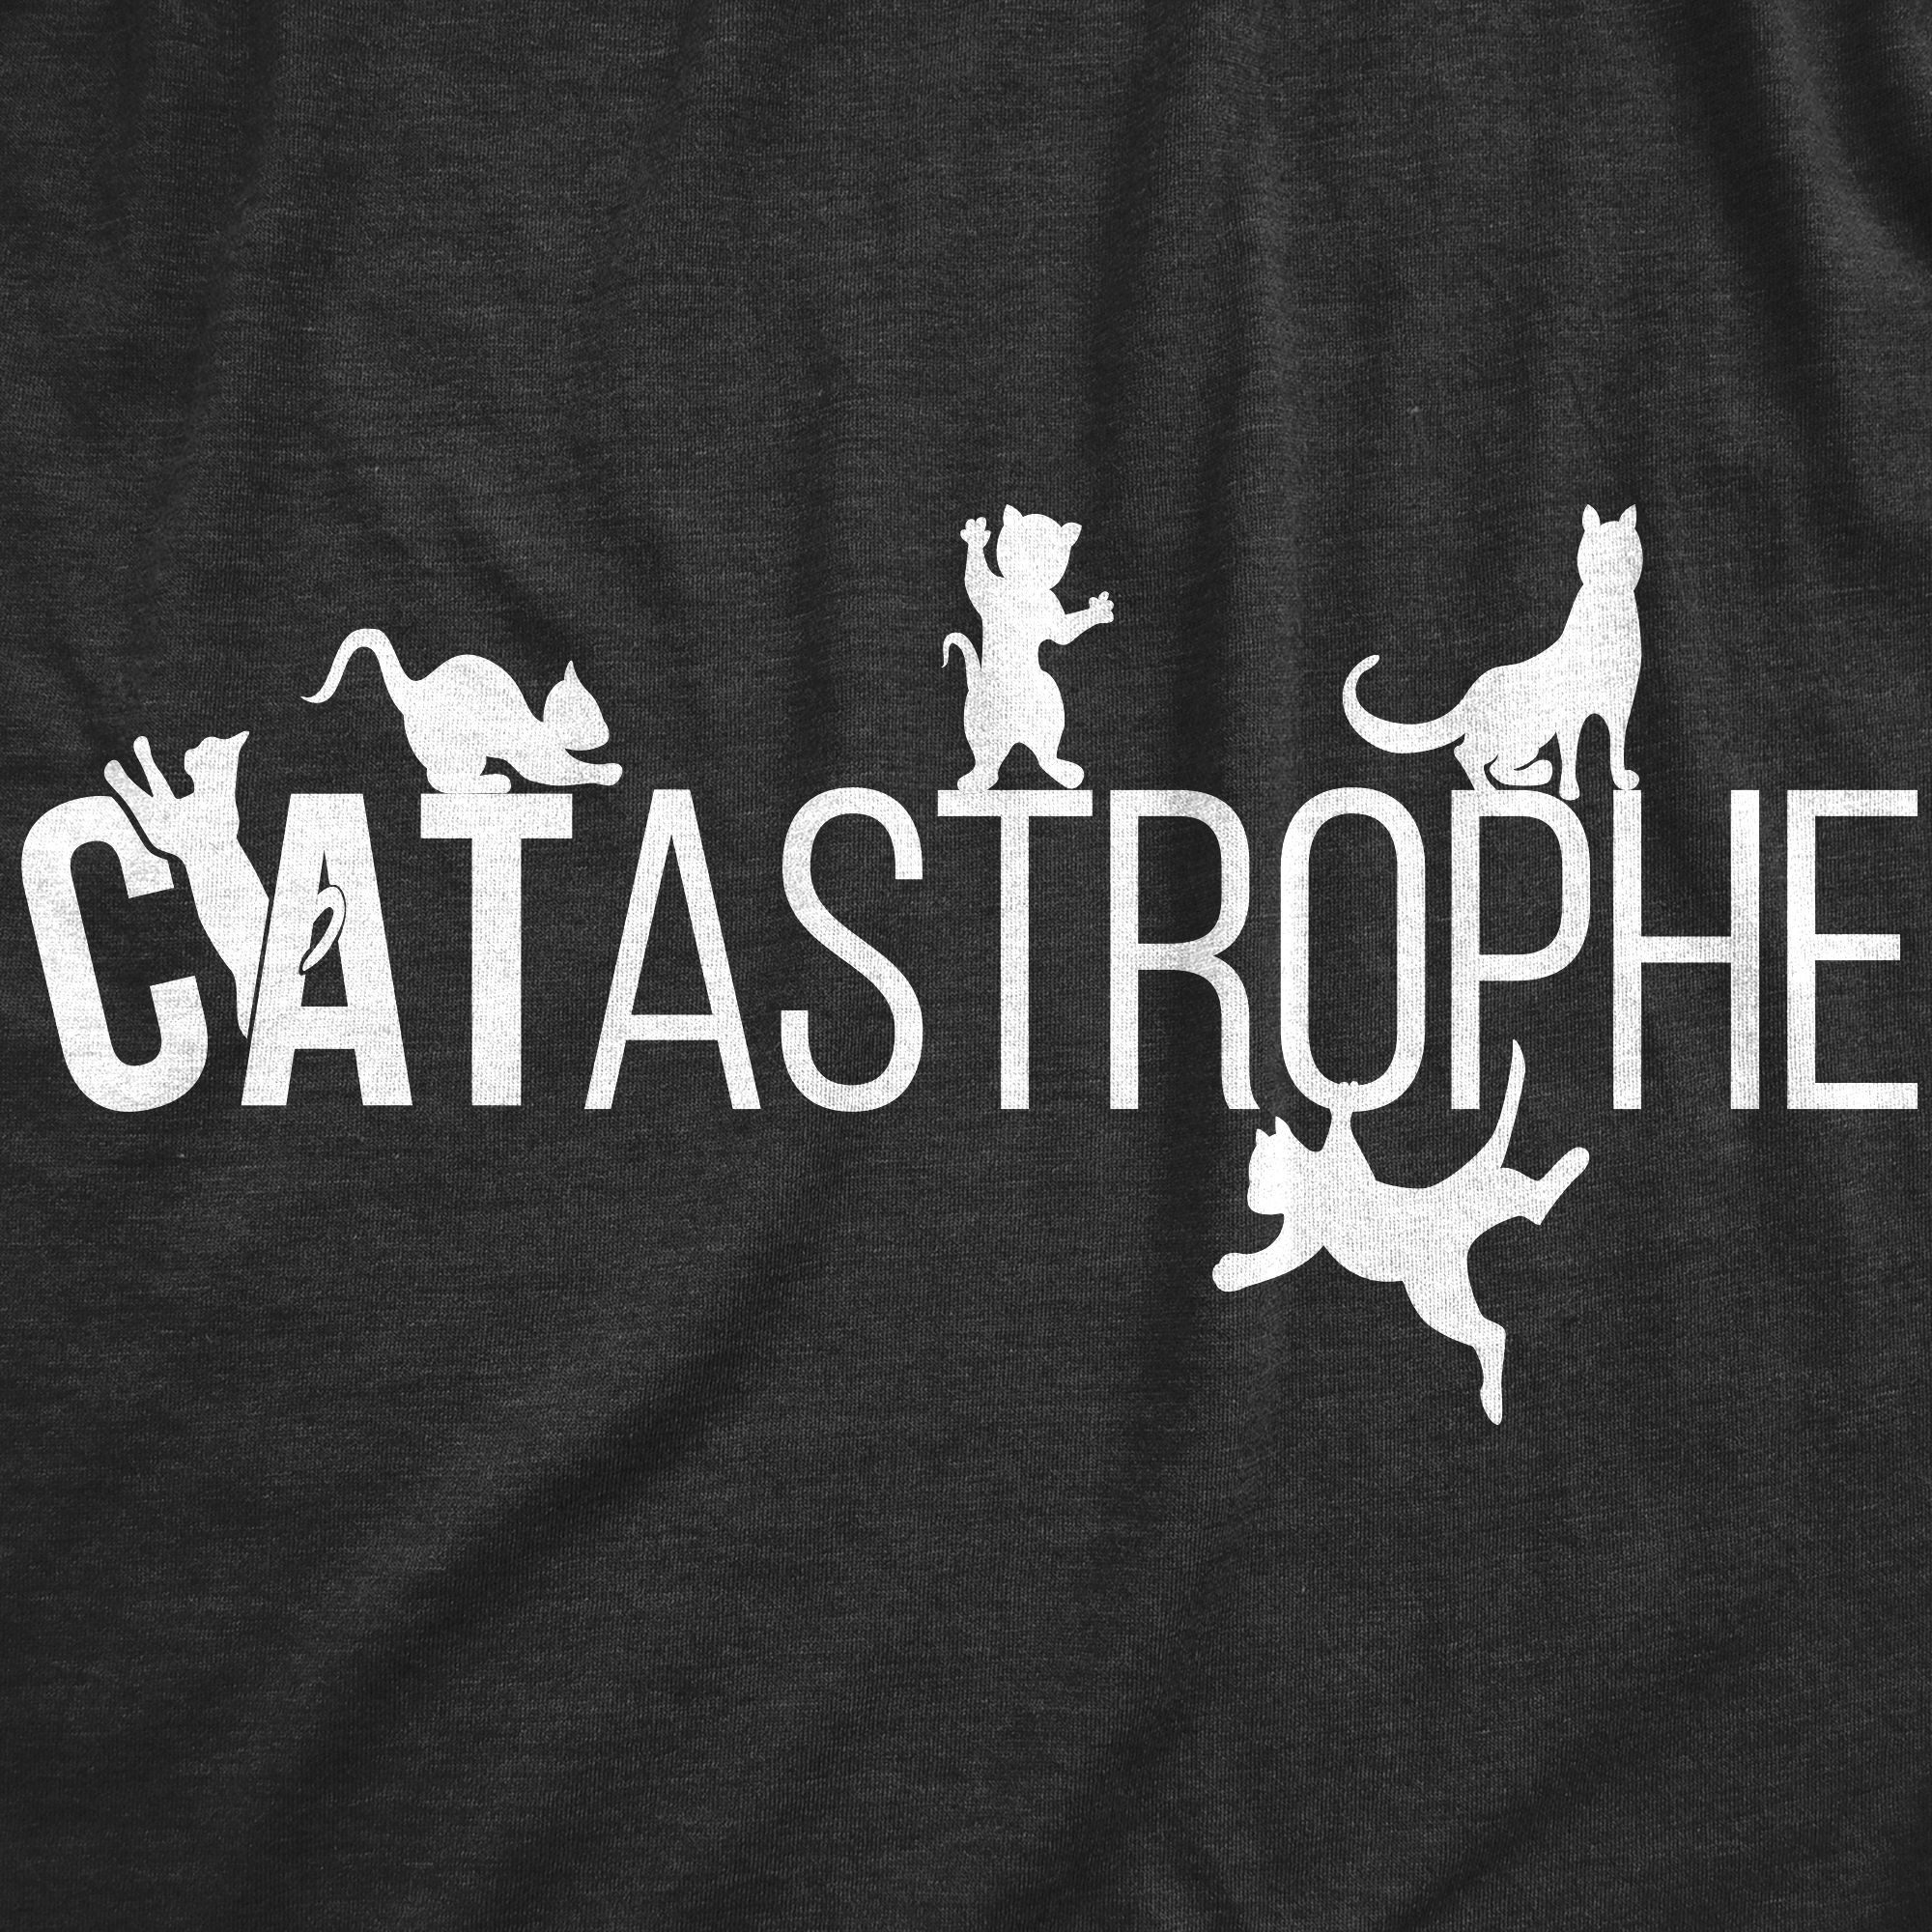 Crazy Dog Tshirts Mens Catastrophe T Shirt Funny Sarcastic Cat Kitten Joke Graphic Tee For Guys